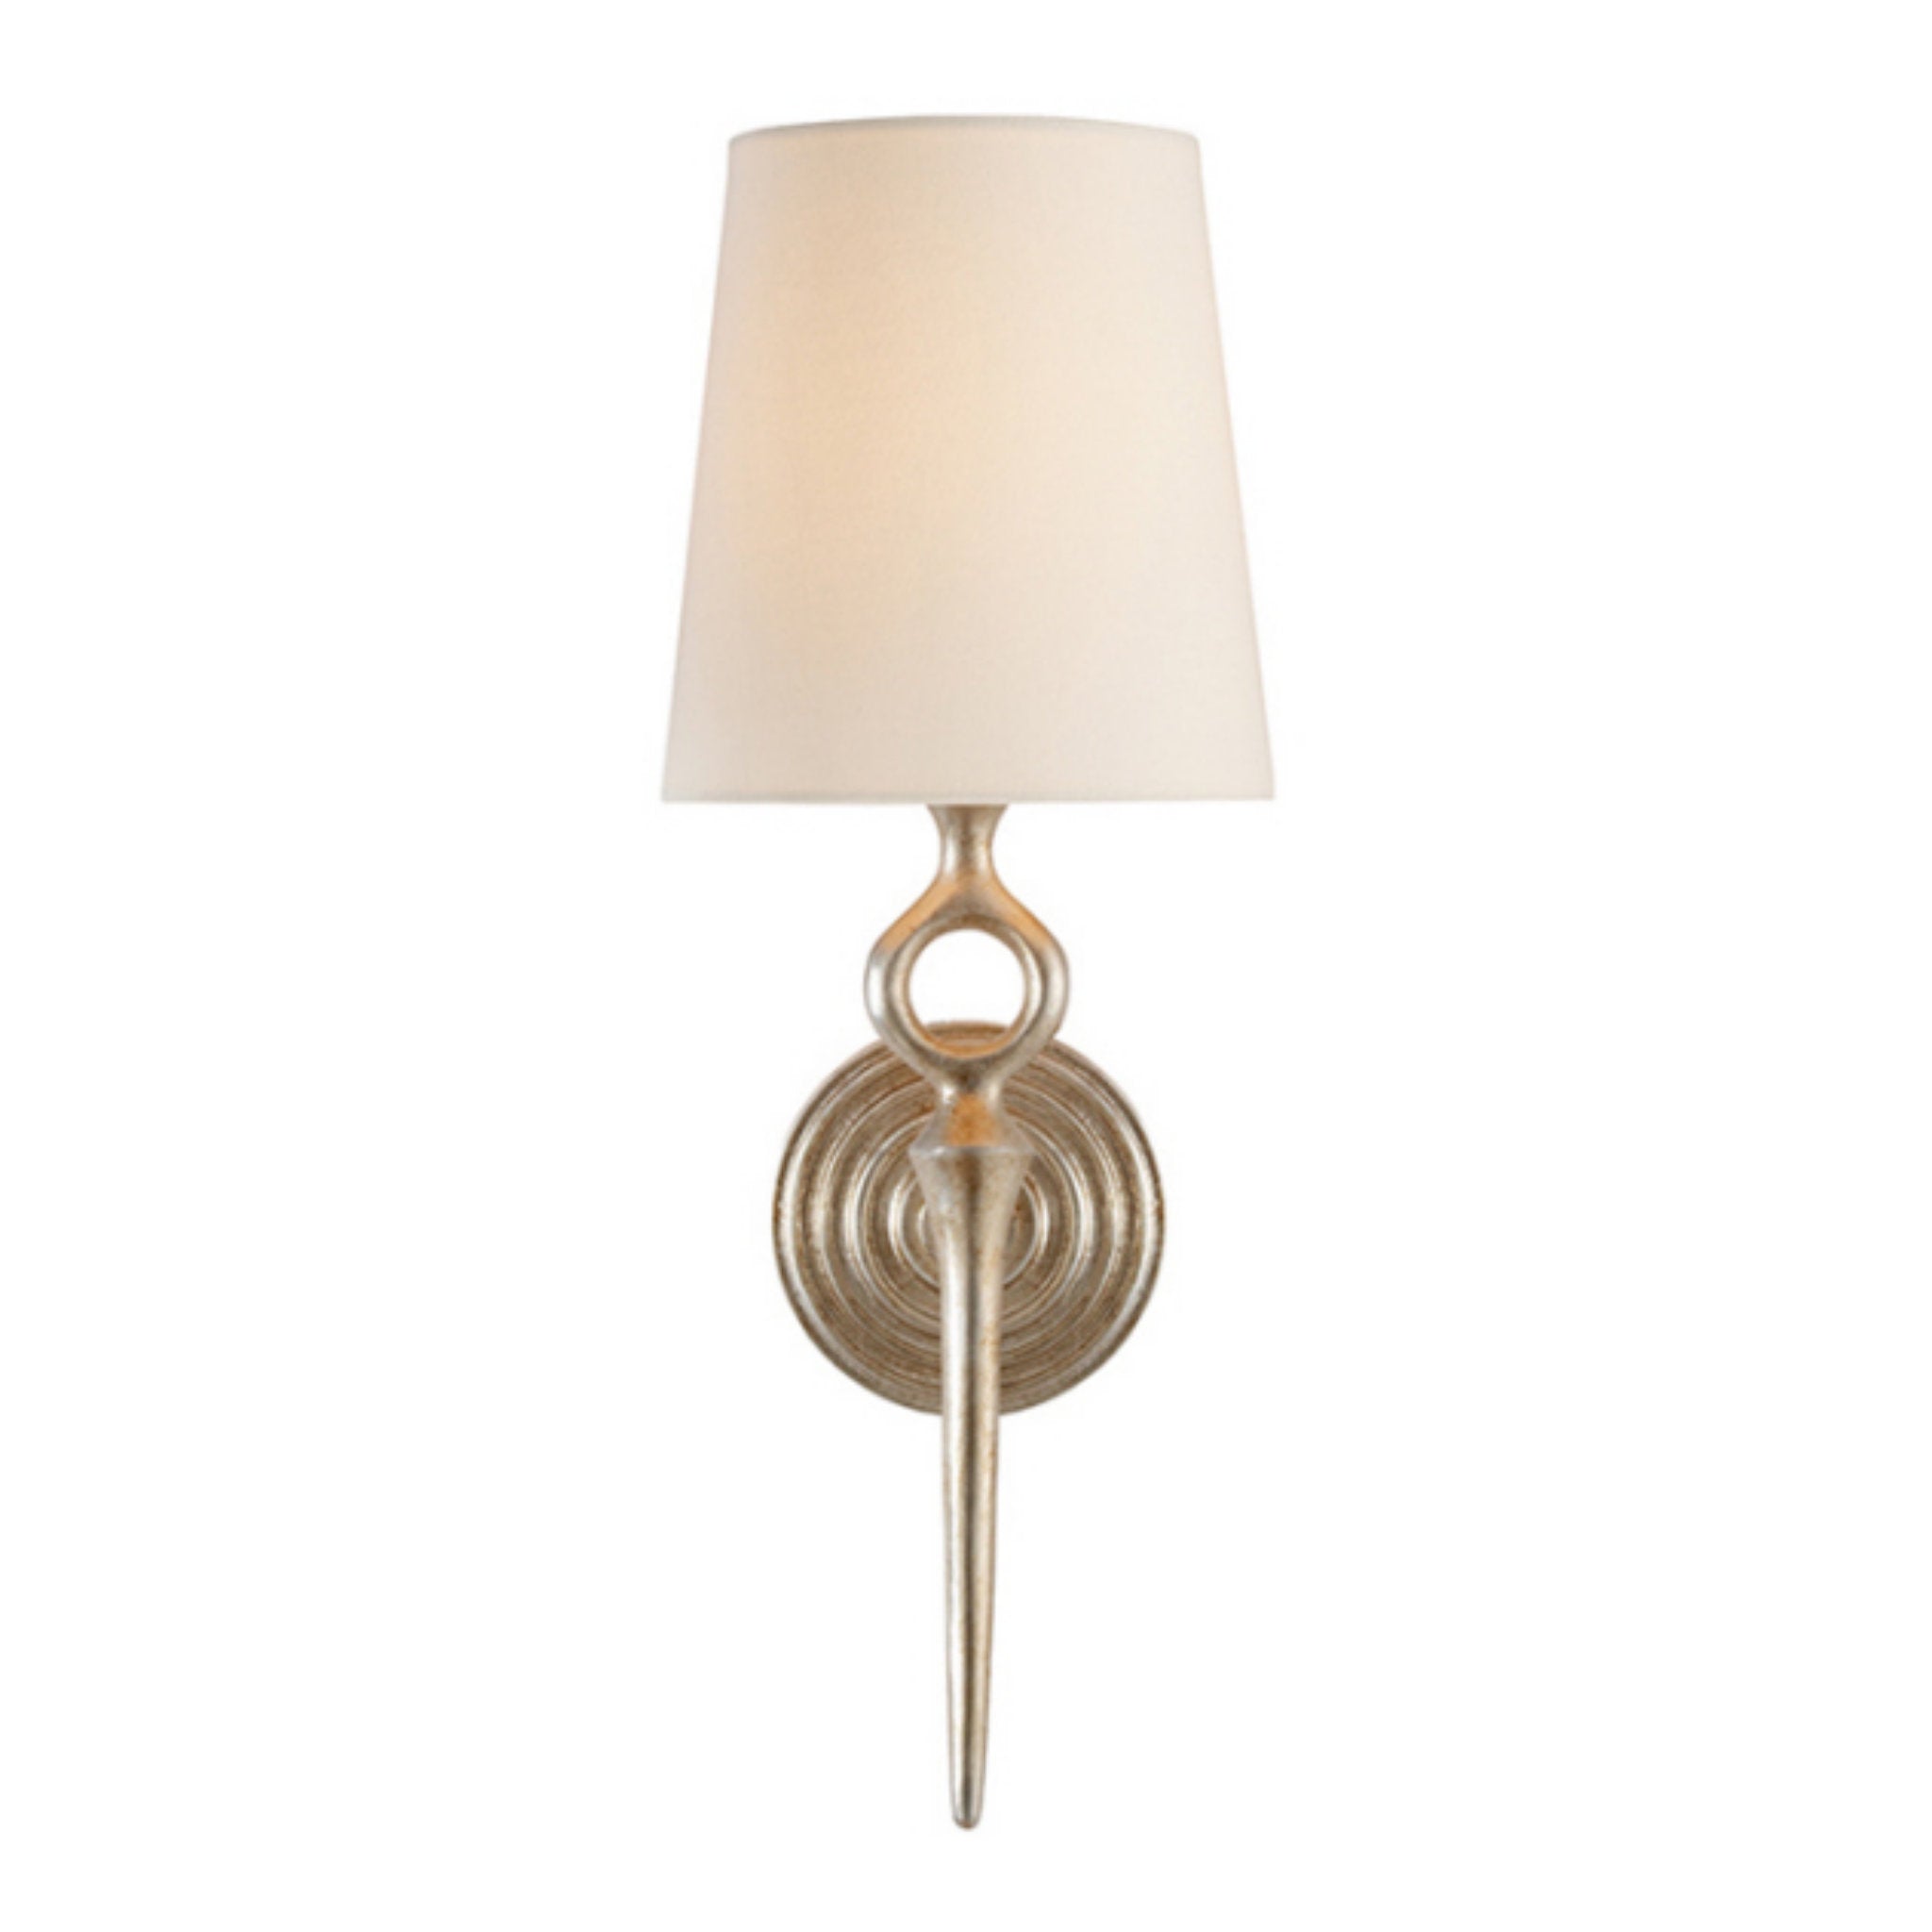 AERIN Bristol Single Sconce in Burnished Silver Leaf with Linen Shade